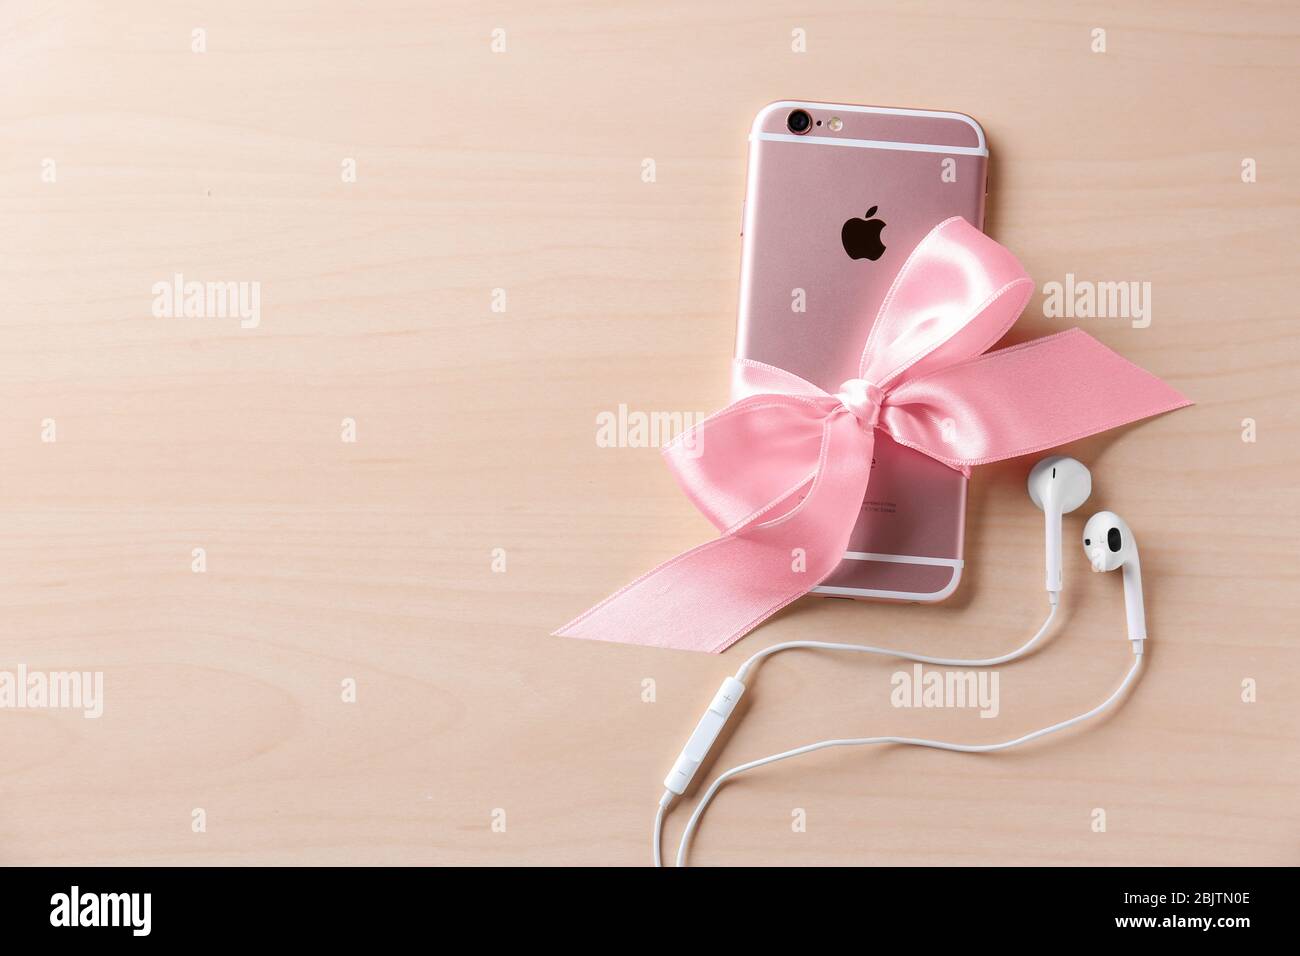 KYIV, UKRAINE - NOVEMBER 28, 2017: Modern iPhone 6s Plus Rose Gold with bow and earpods on wooden background Stock Photo